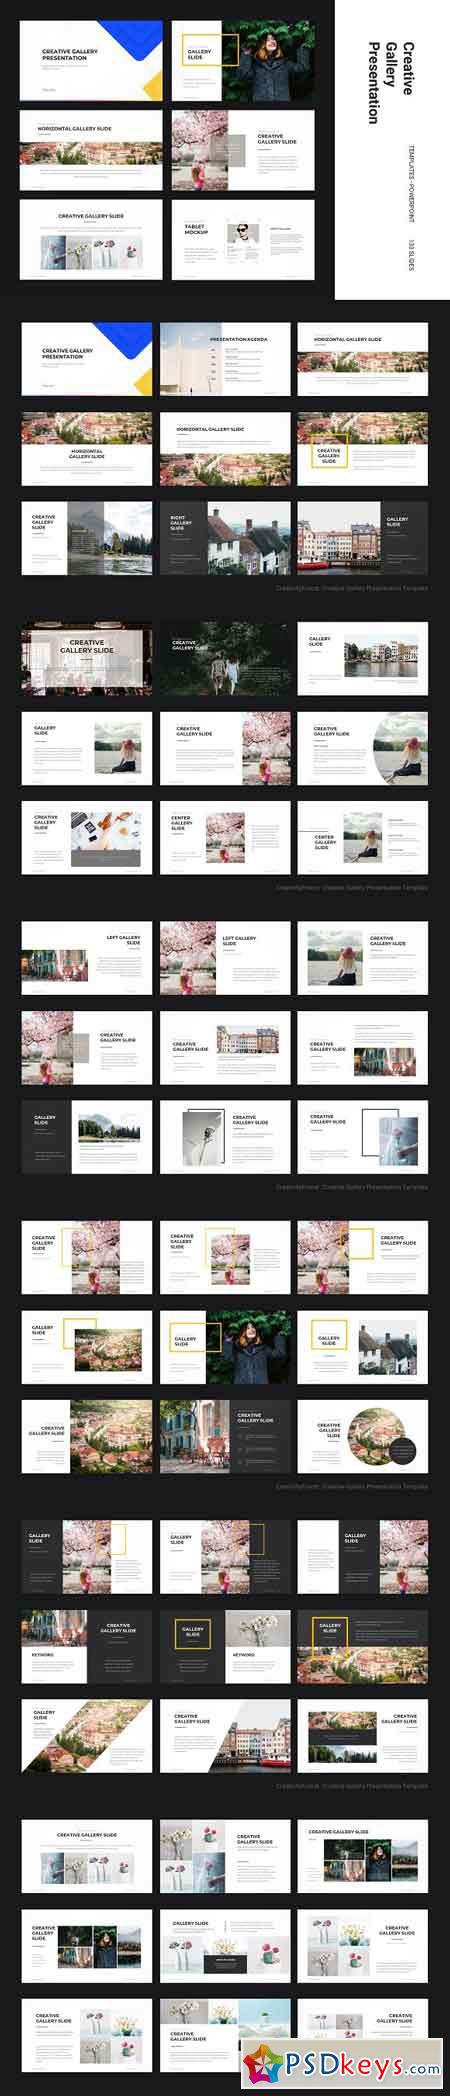 Creative Gallery PowerPoint Template 2824603